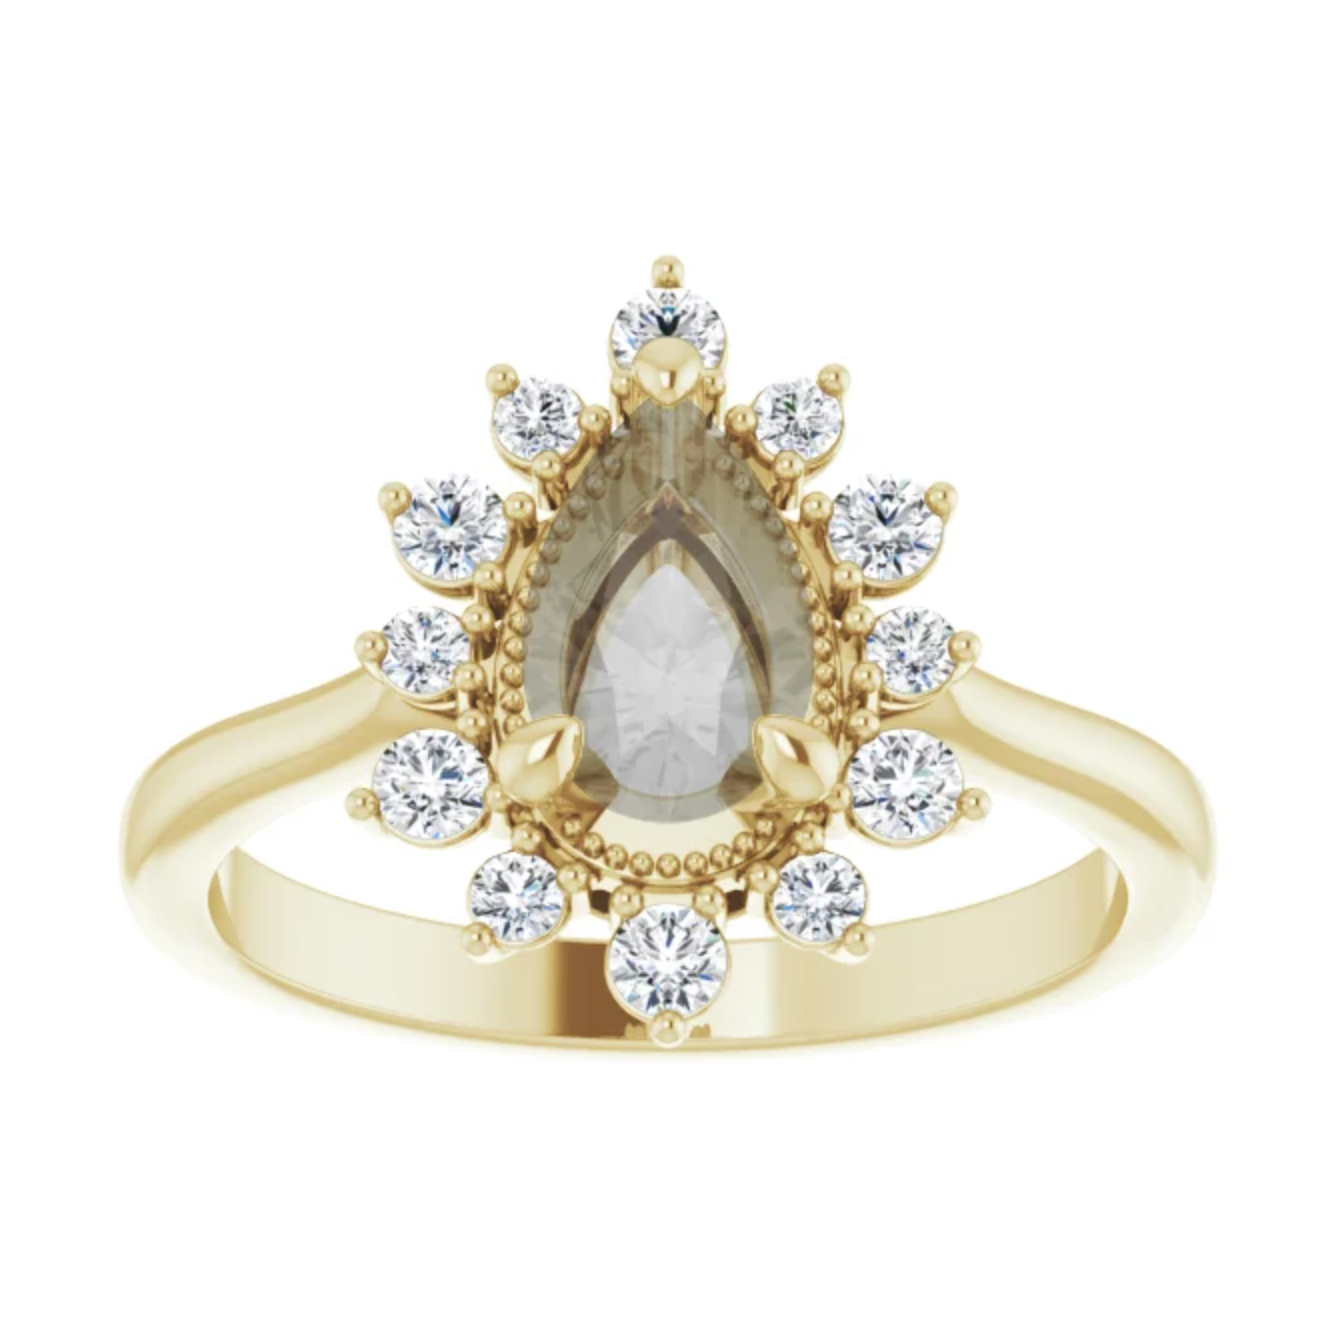 CAELEN (M) Lucy Setting - Midwinter Co. Alternative Bridal Rings and Modern Fine Jewelry